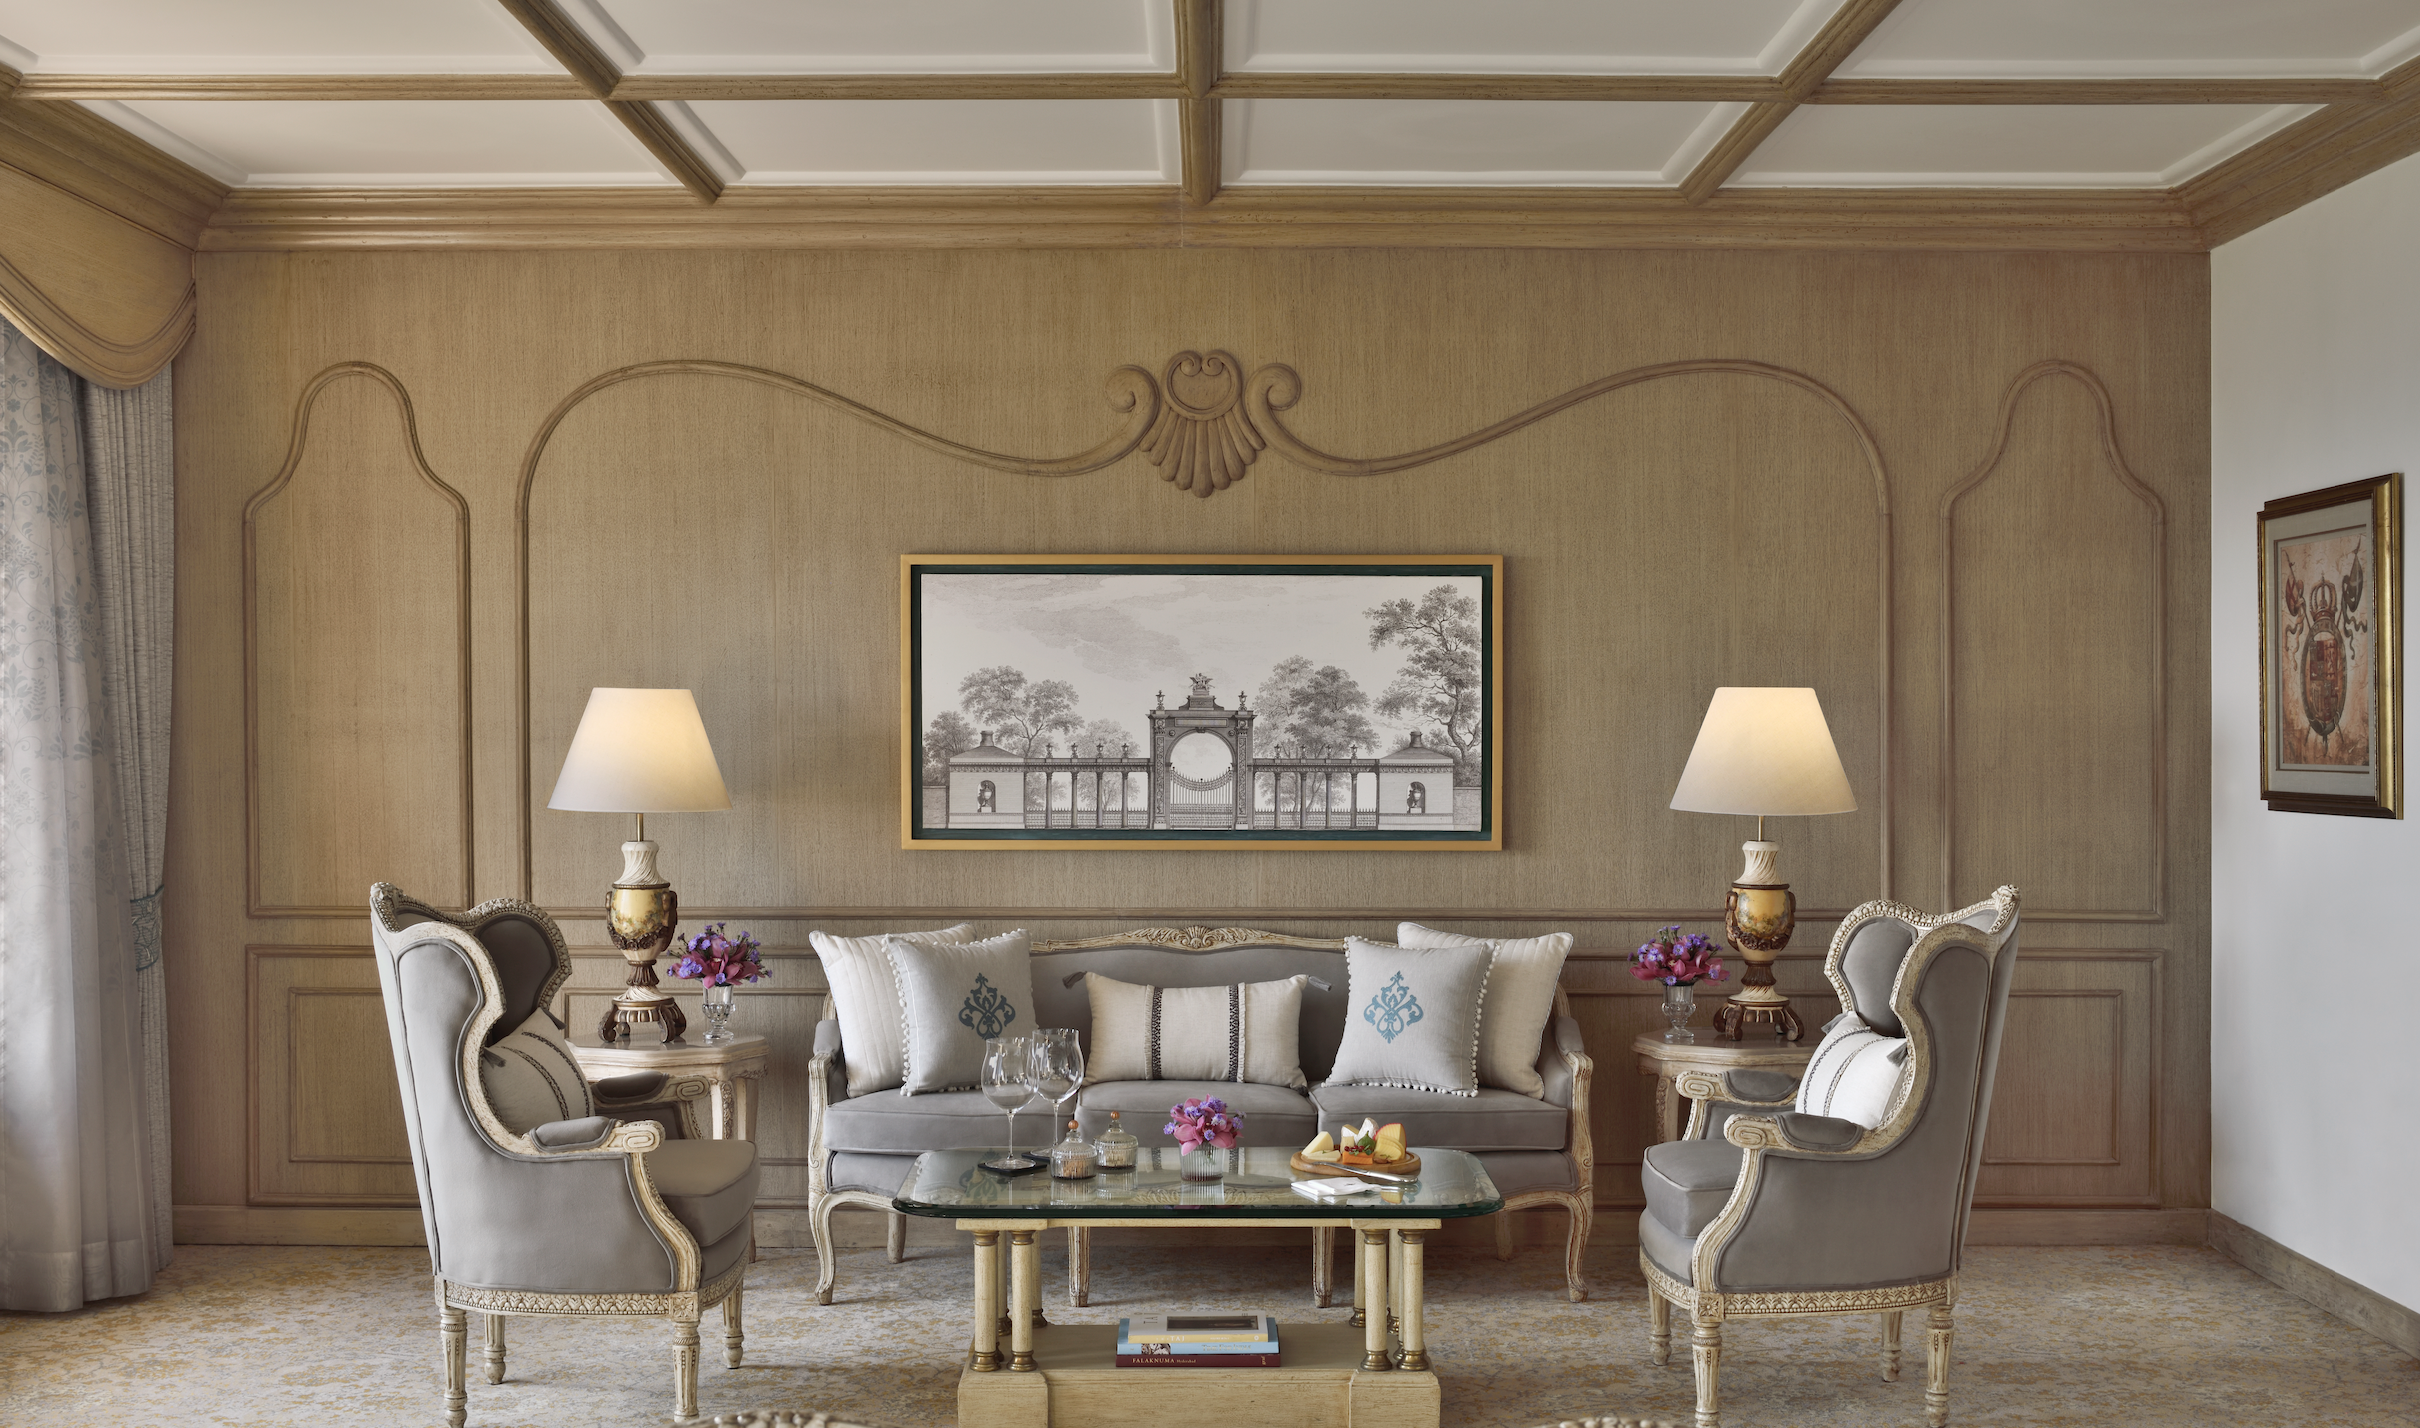 Sitting room of a Grand Luxury Suite at the Taj Mahal Hotel in New Delhi, India